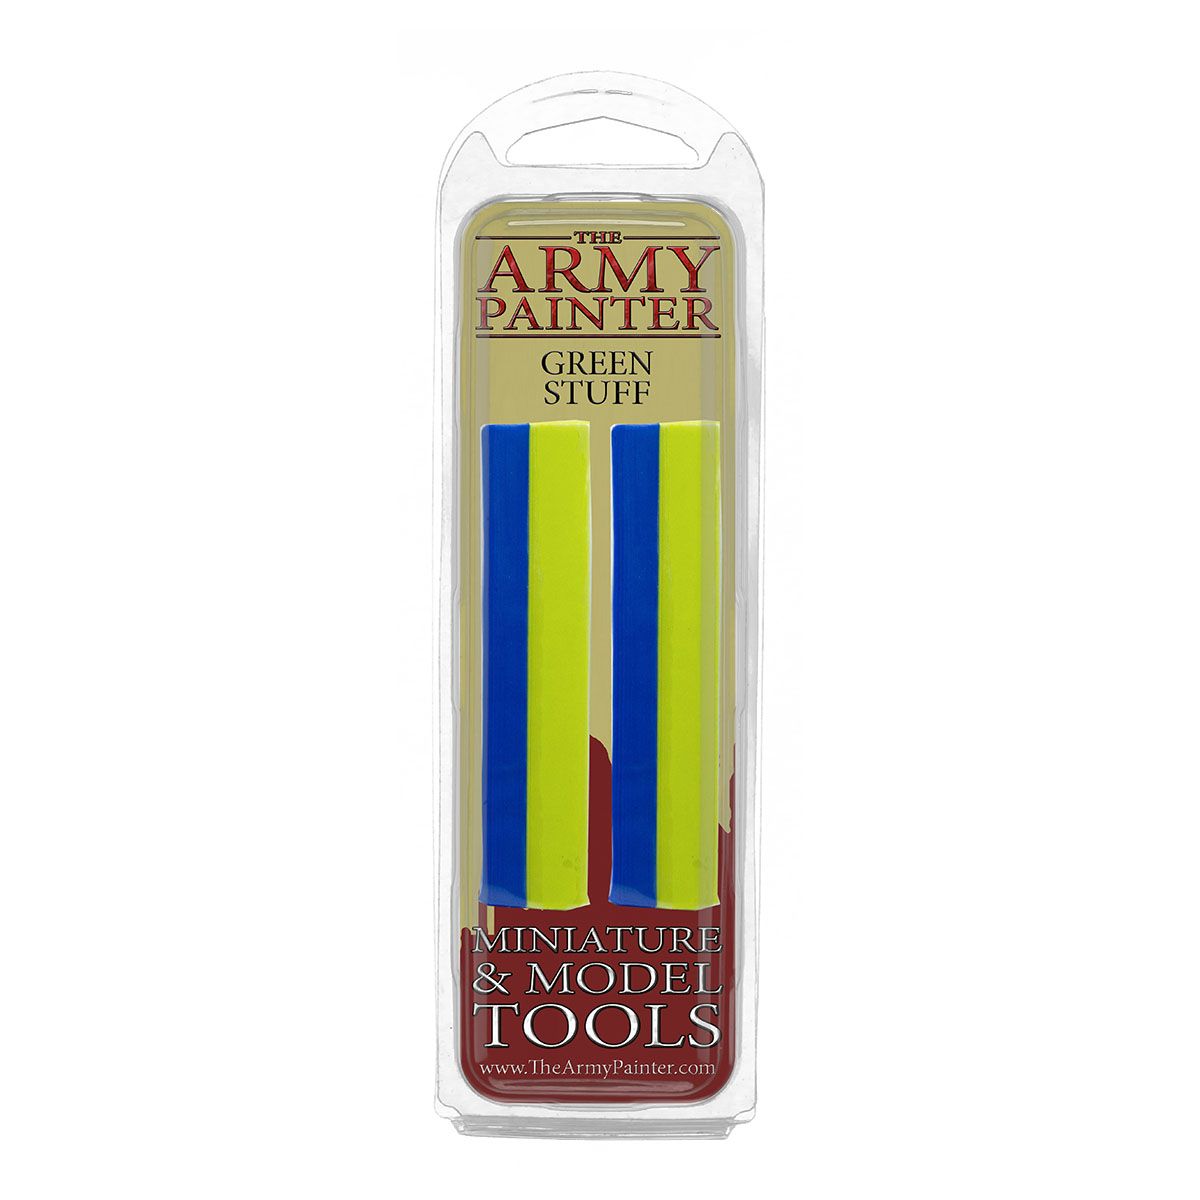 Green Stuff - TL5037 - The Army Painter